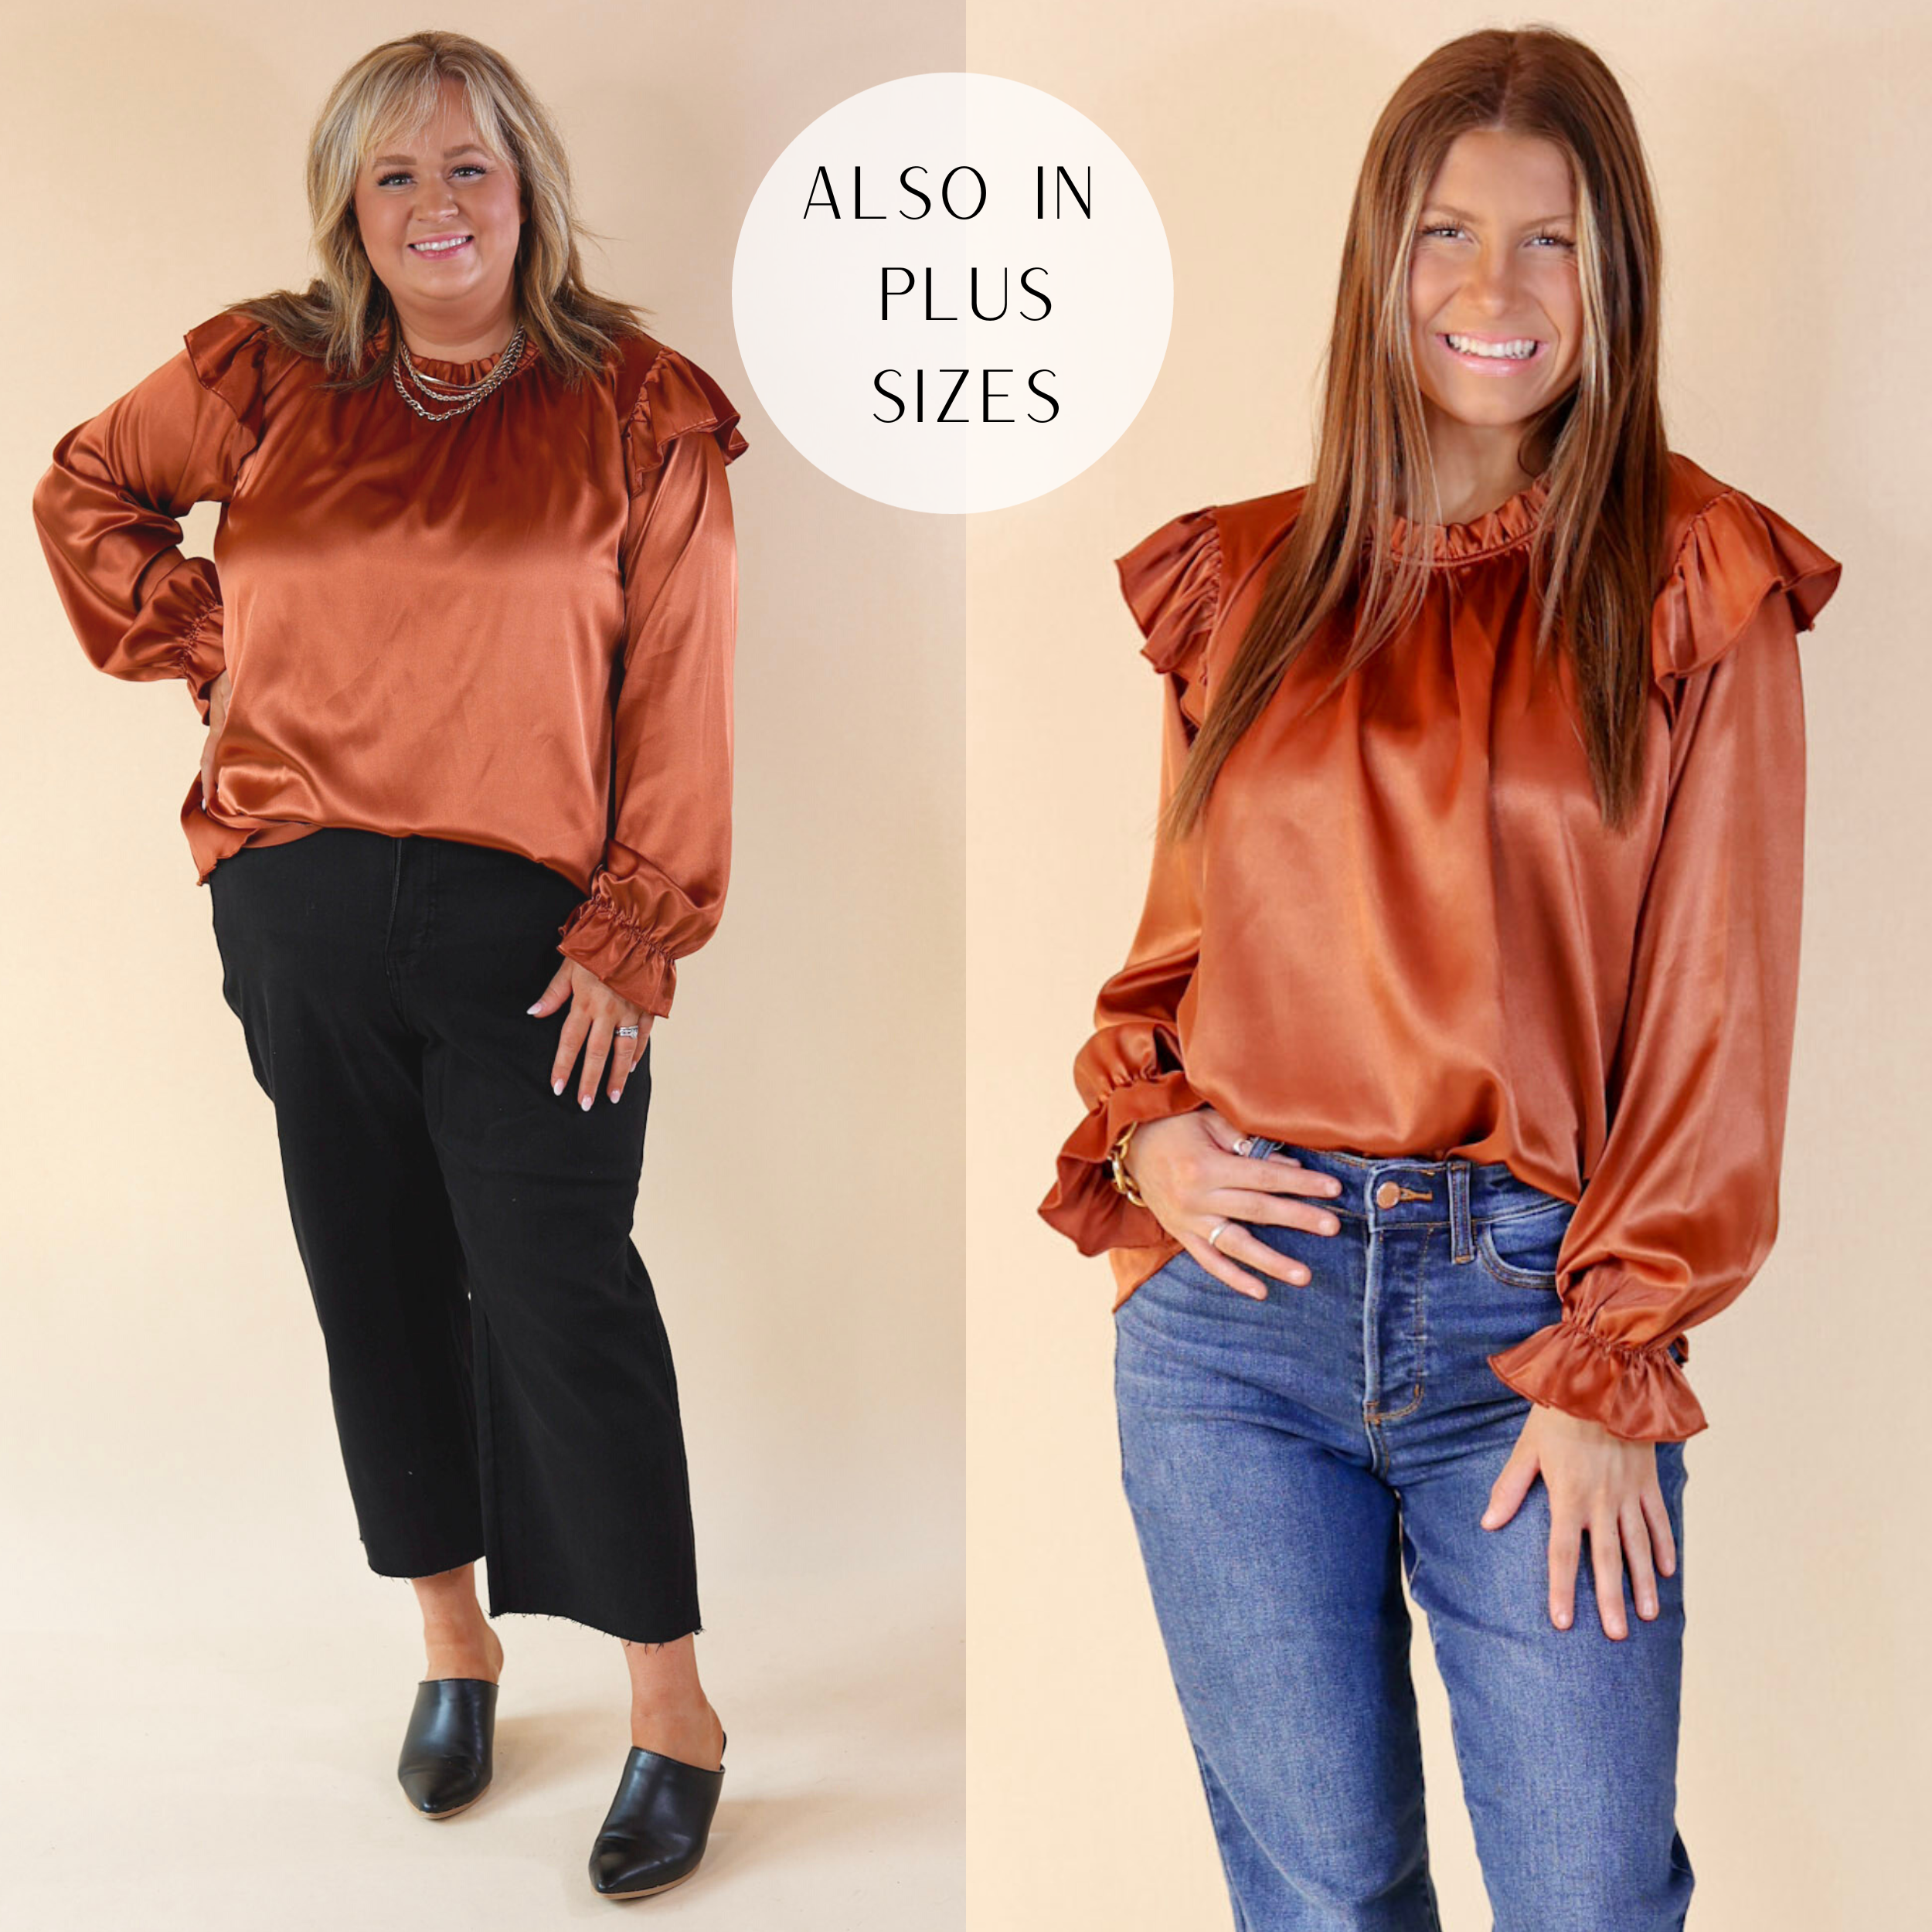 Model are wearing a long sleeve blouse in rust orange with ruffle detail on the shoulders and wrists. Plus size model has it paired with black jeans, black mules, and gold jewelry. SIze small model has it paired with bootcut jeans and gold jewelry.